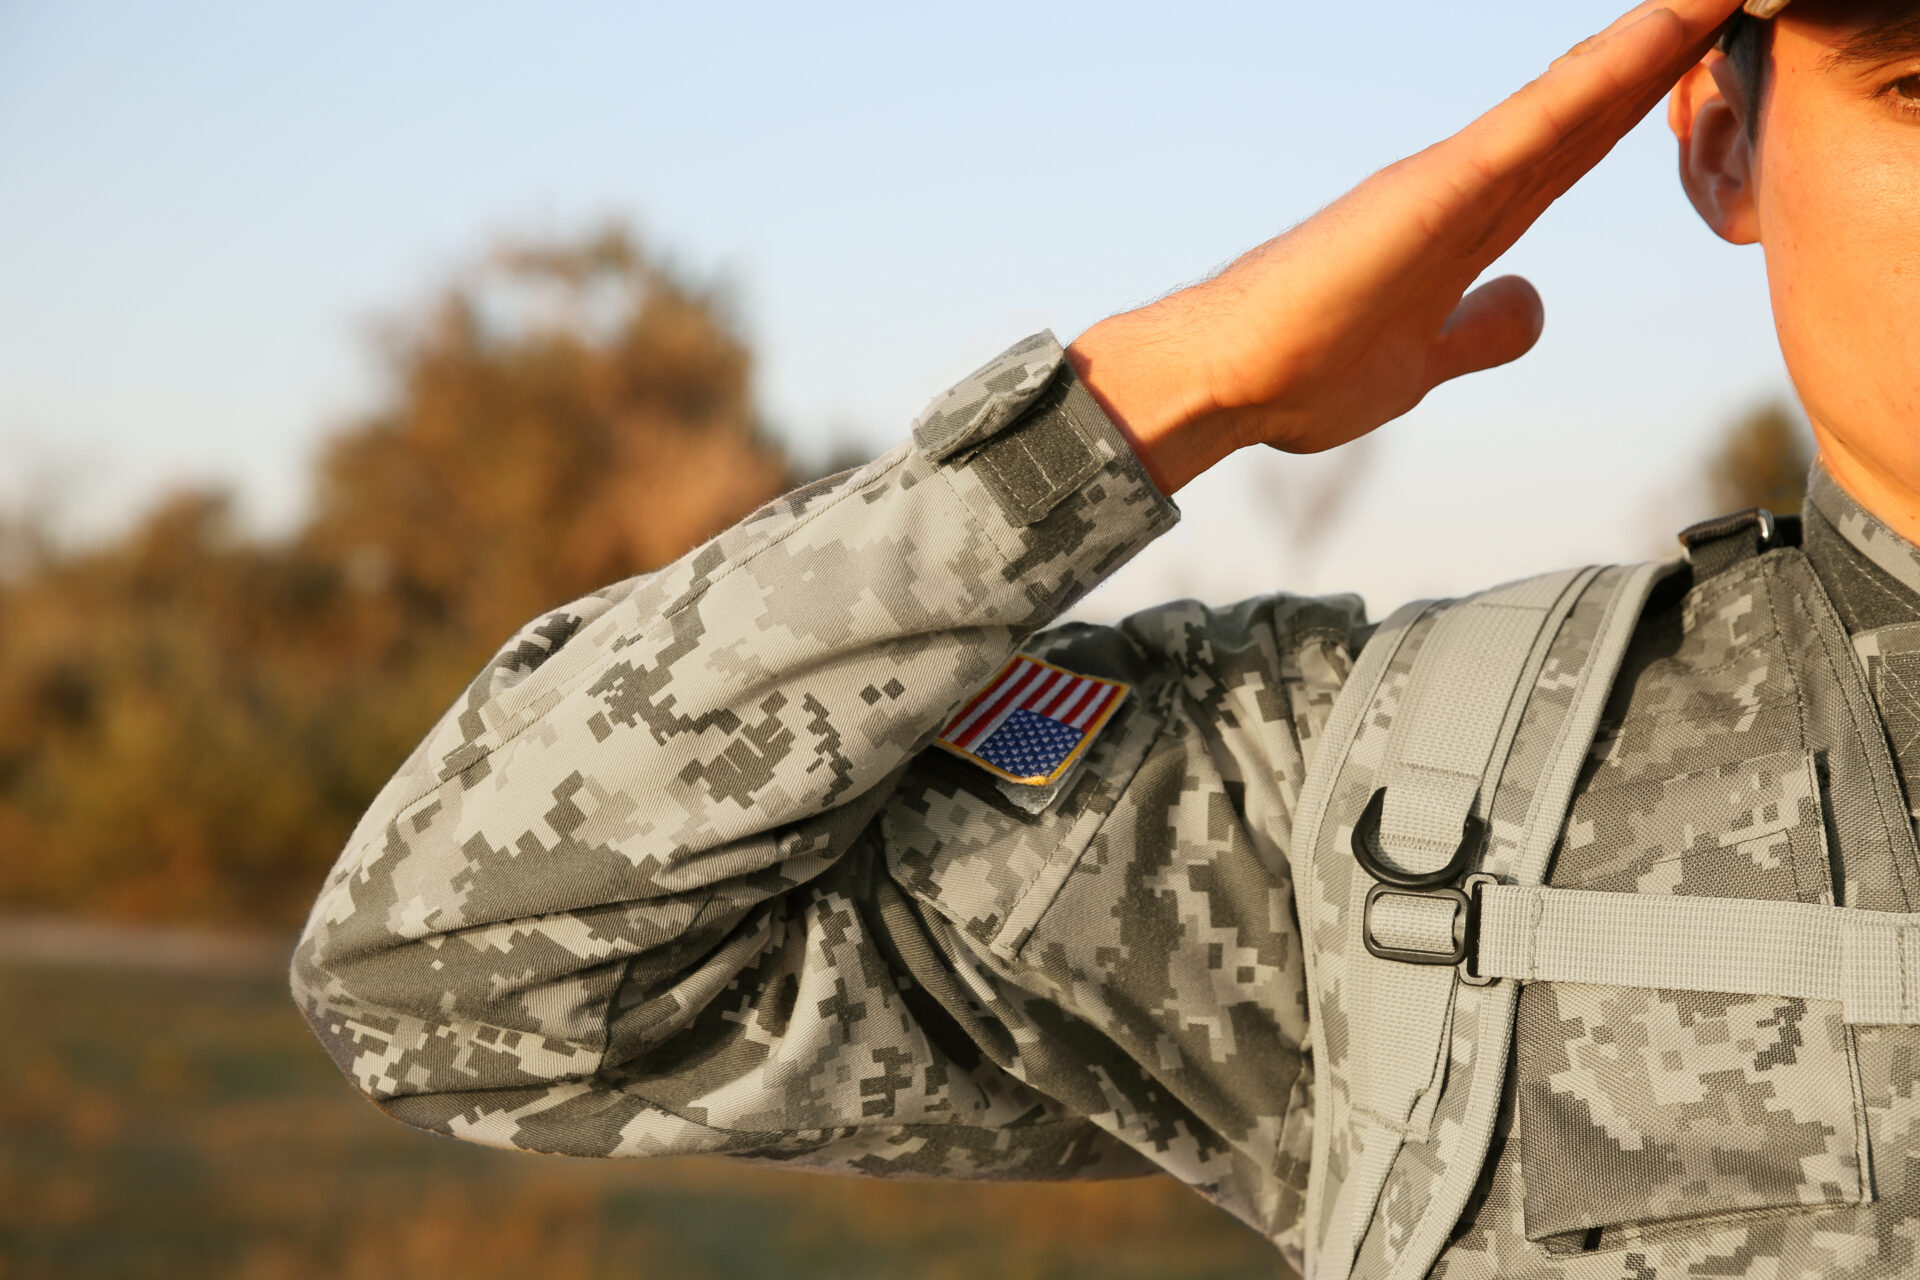 Close up of a U.S. Army National Guard soldier in uniform. An American flag patch can be seen on the soldier's shoulder as they salute.